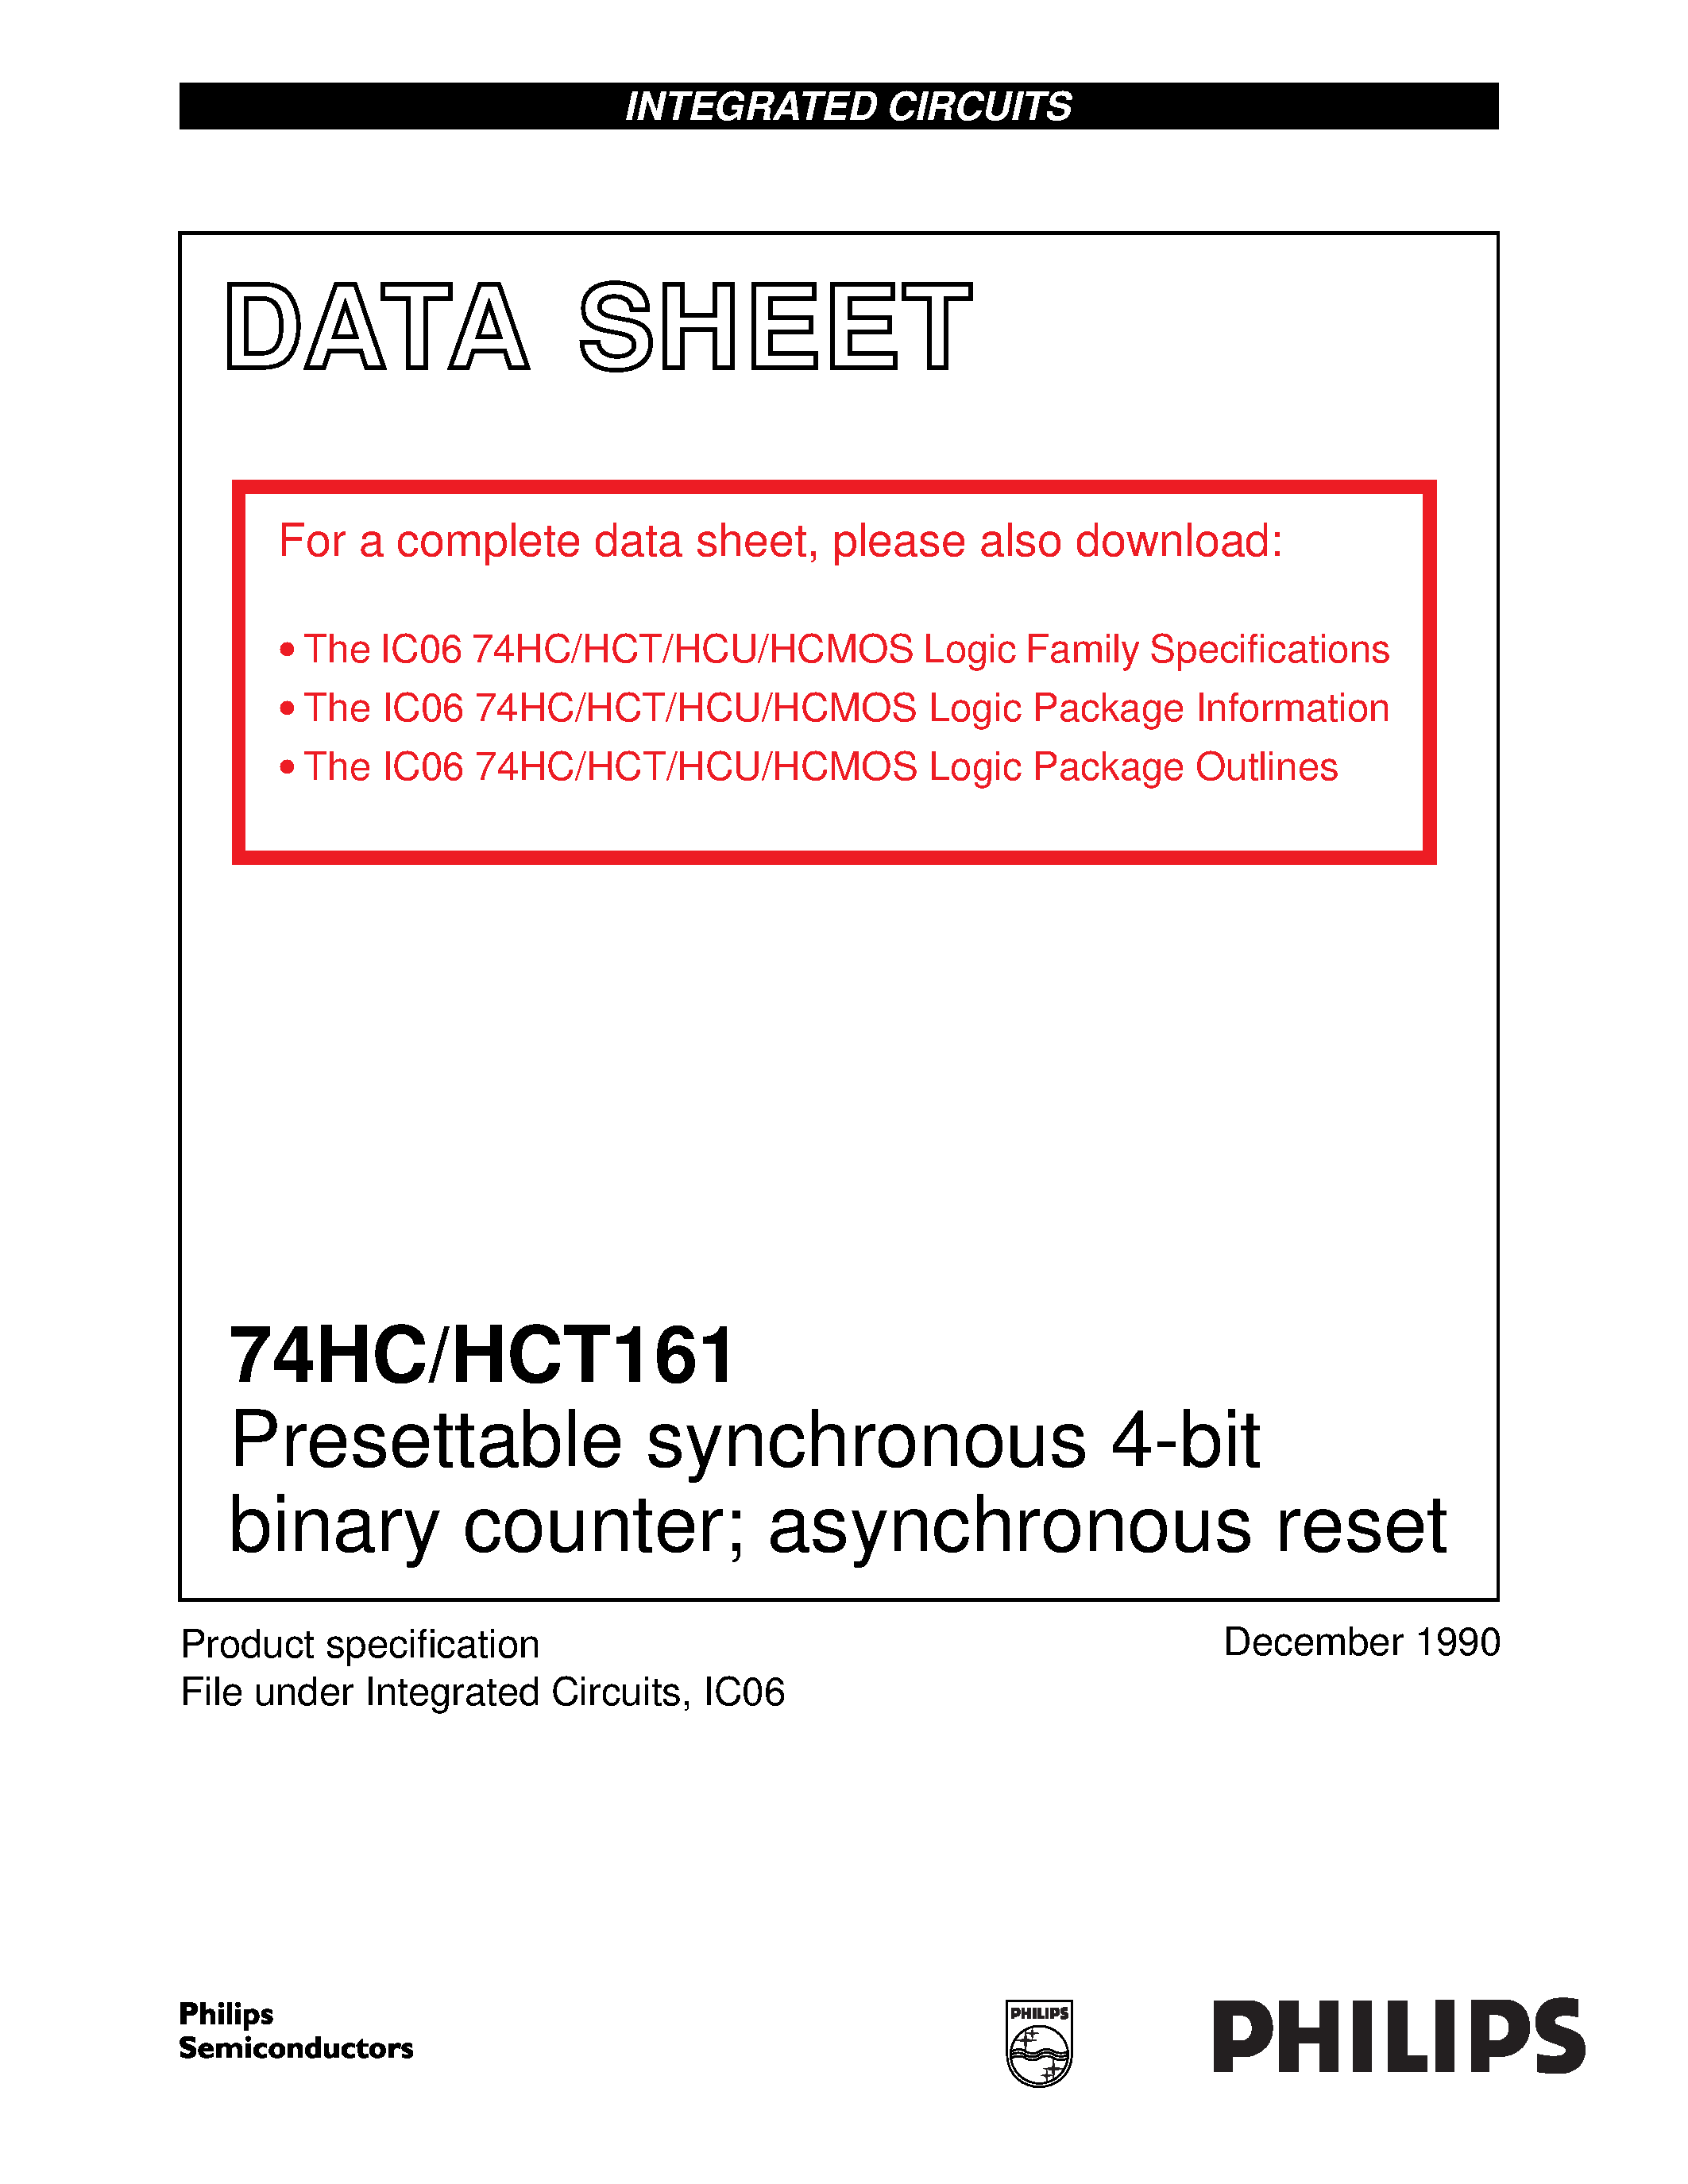 Datasheet 74HCT161 - Presettable synchronous 4-bit binary counter asynchronous reset page 1